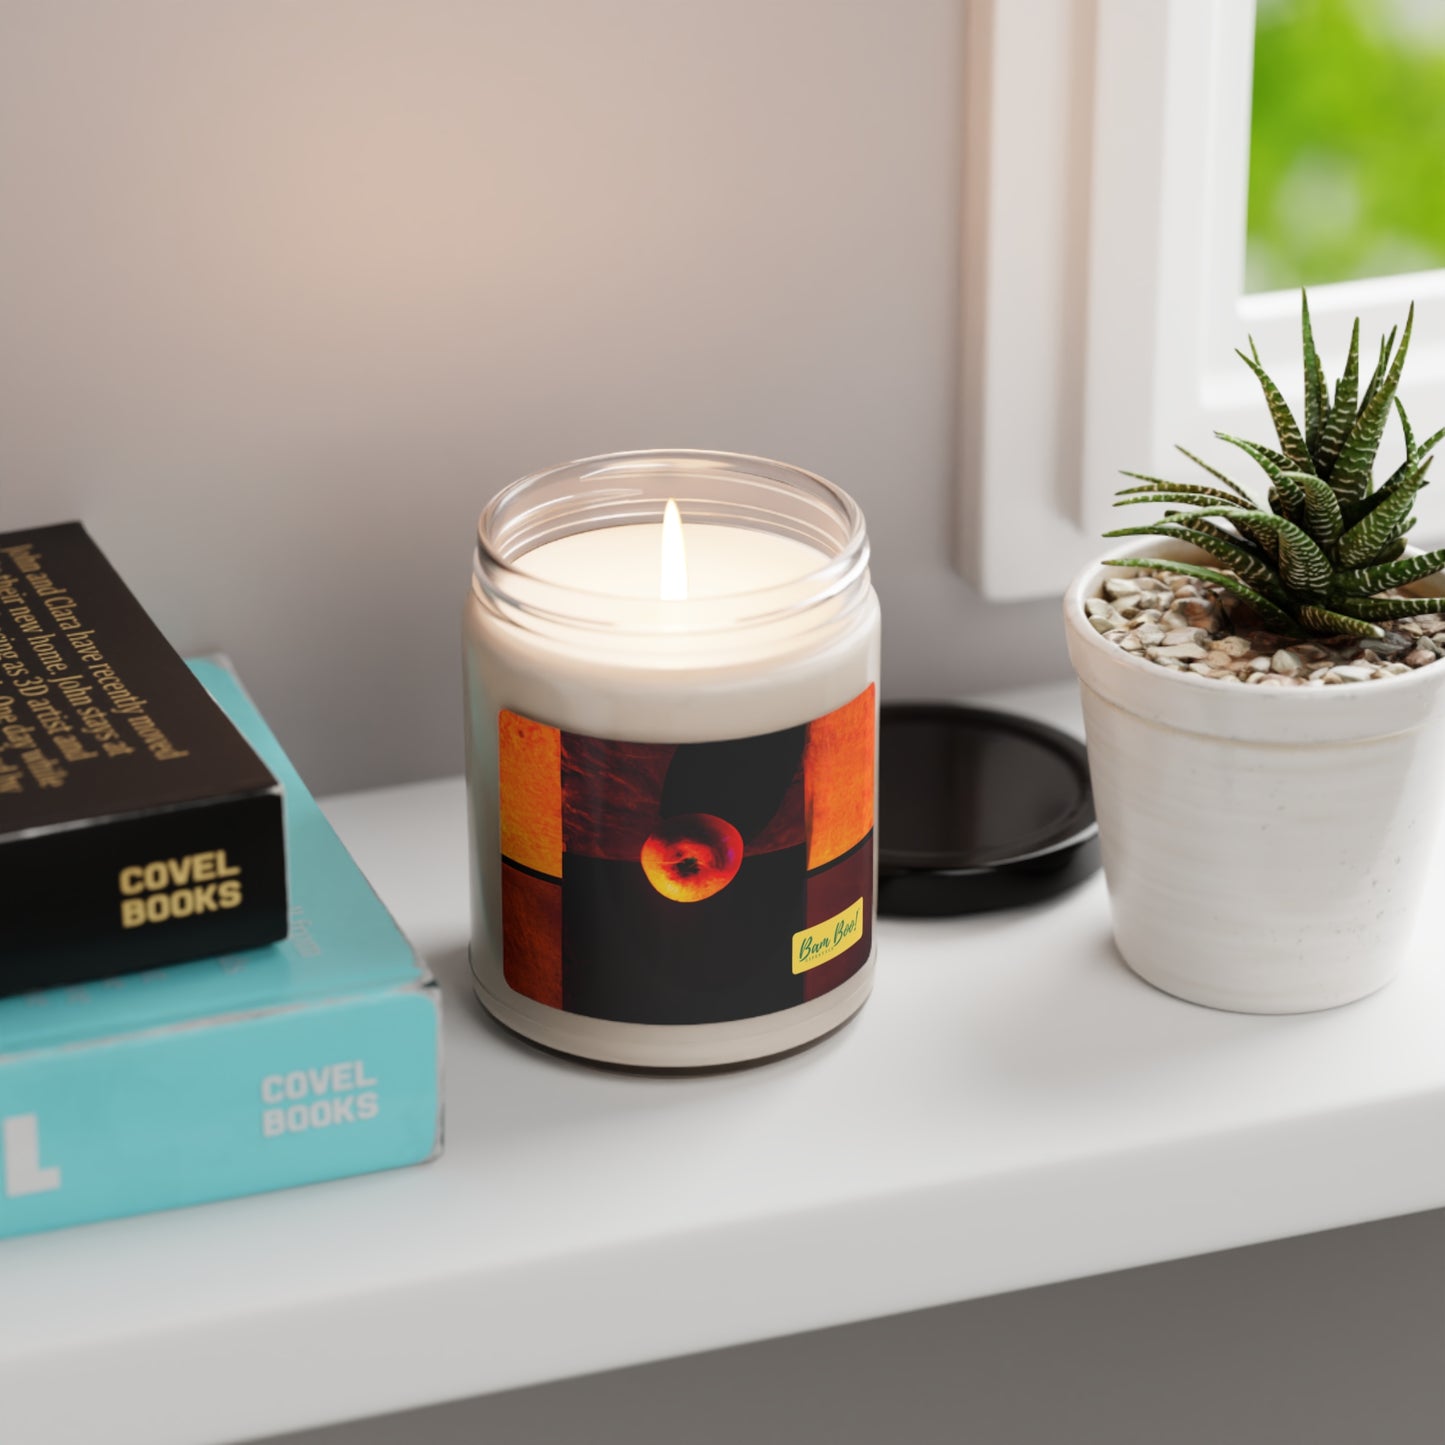 "Illuminations of Interconnectedness" - Bam Boo! Lifestyle Eco-friendly Soy Candle